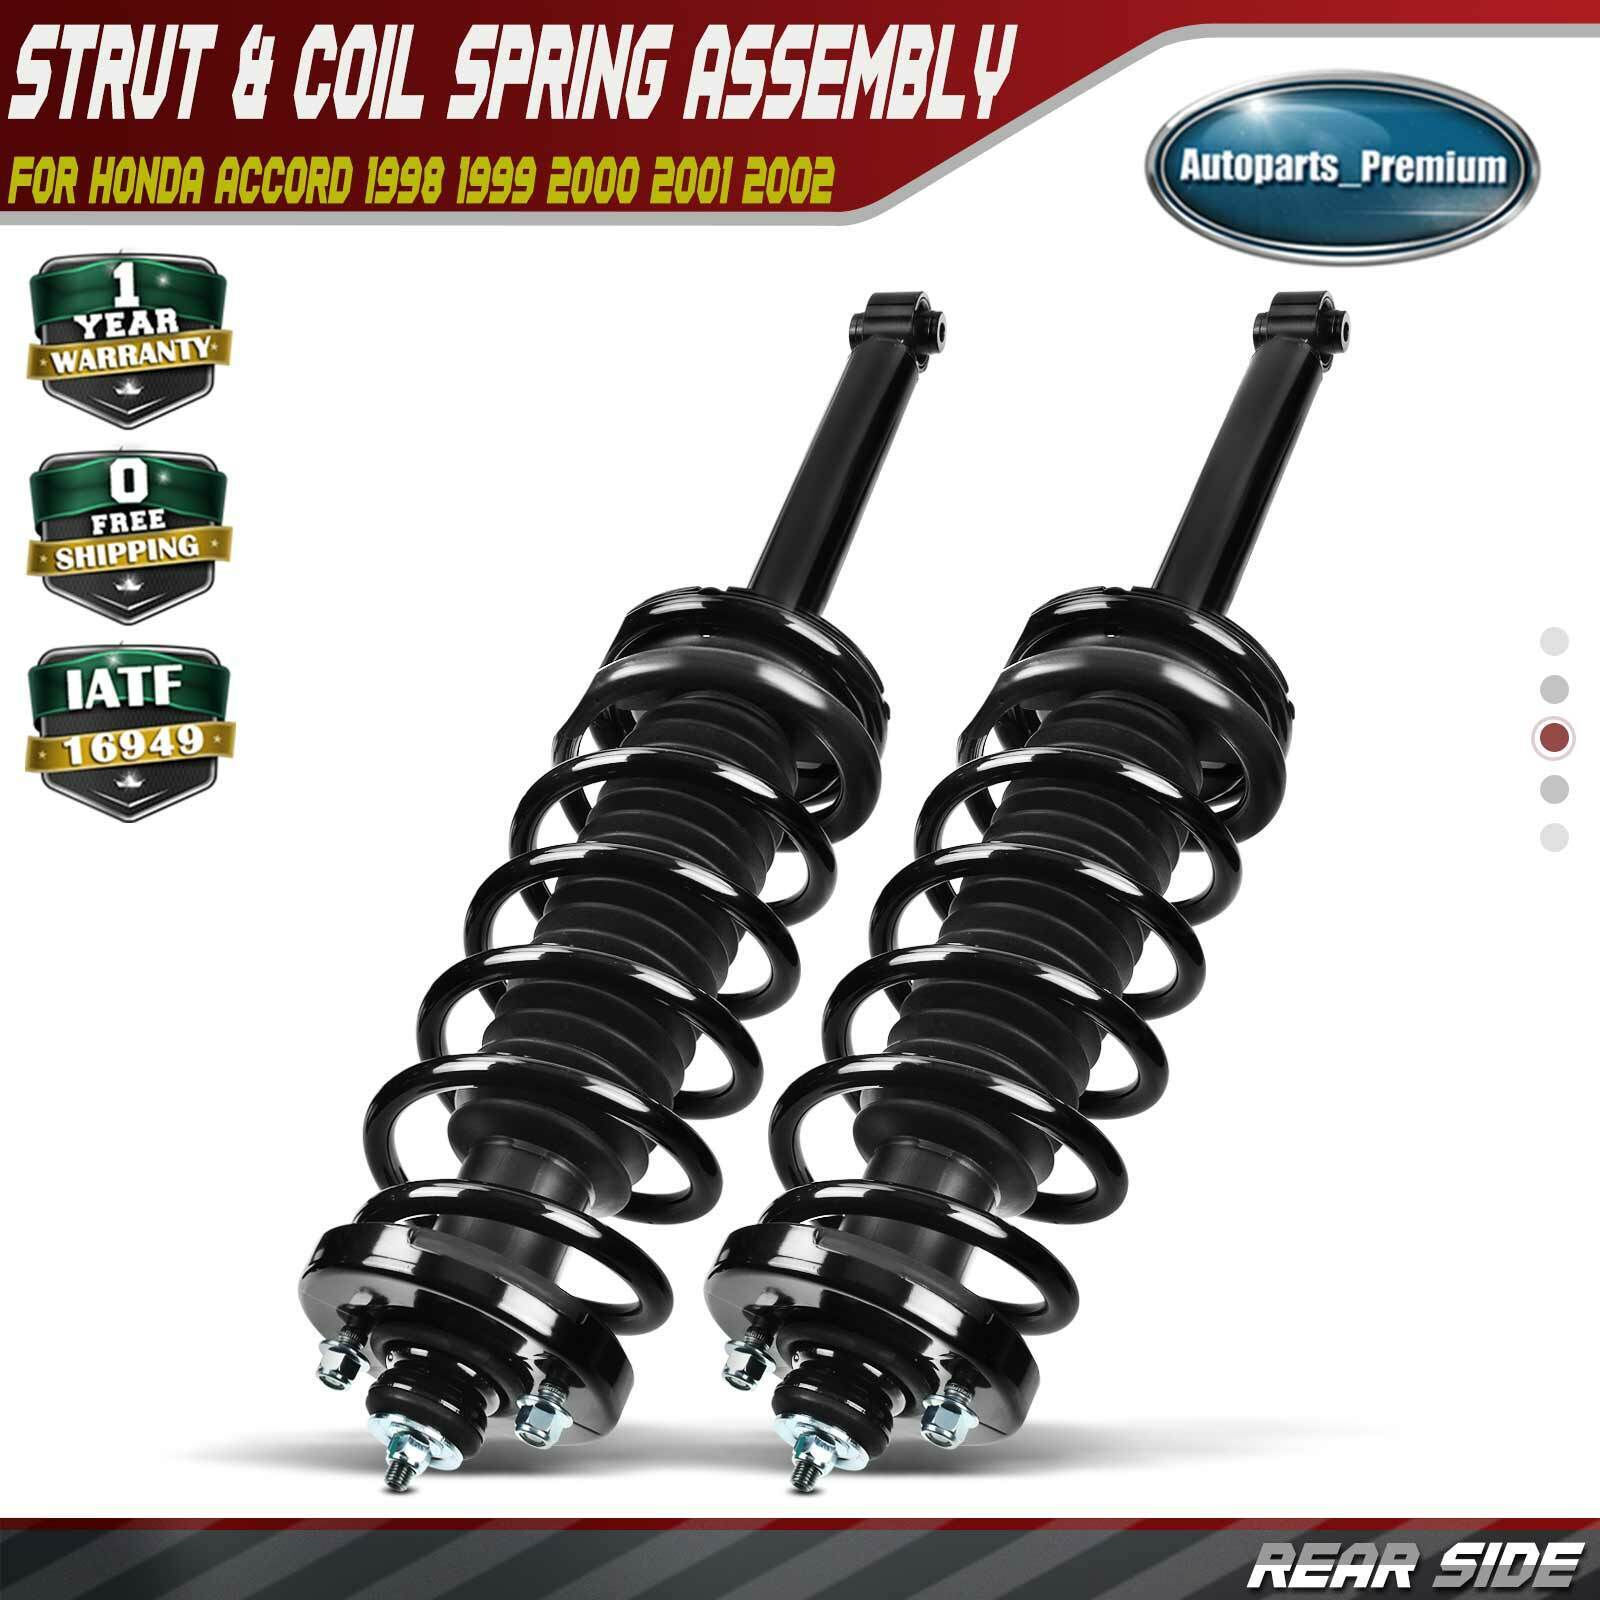 2x Rear Side Complete Strut & Coil Spring Assembly for Honda Accord 1998-2002